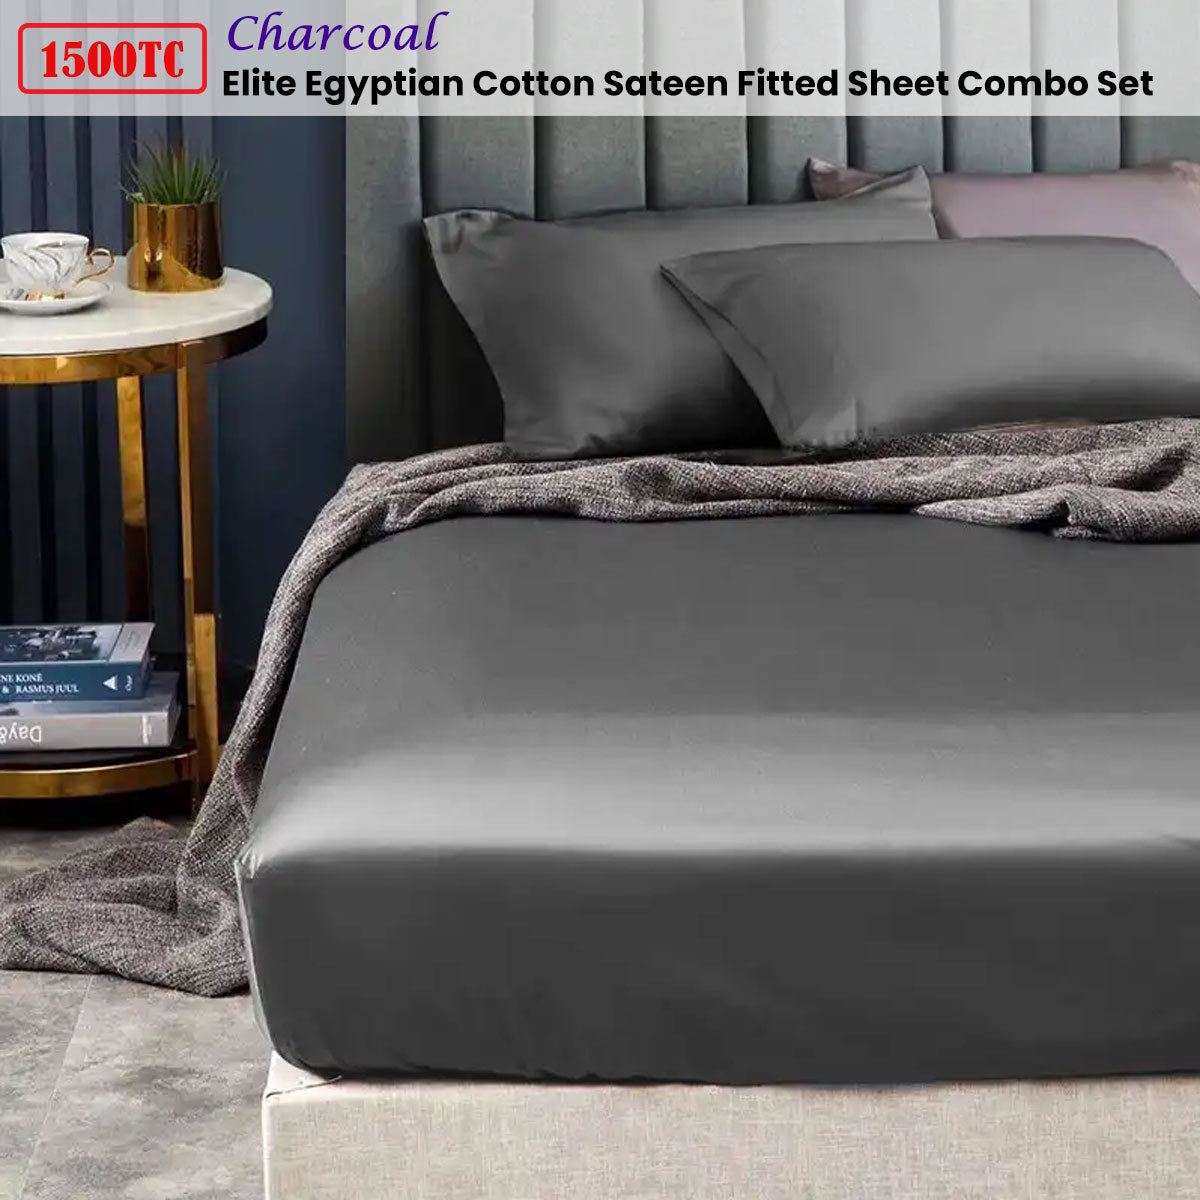 1500TC Elite Egyptian Cotton Sateen Fitted Sheet Combo Set Charcoal Double